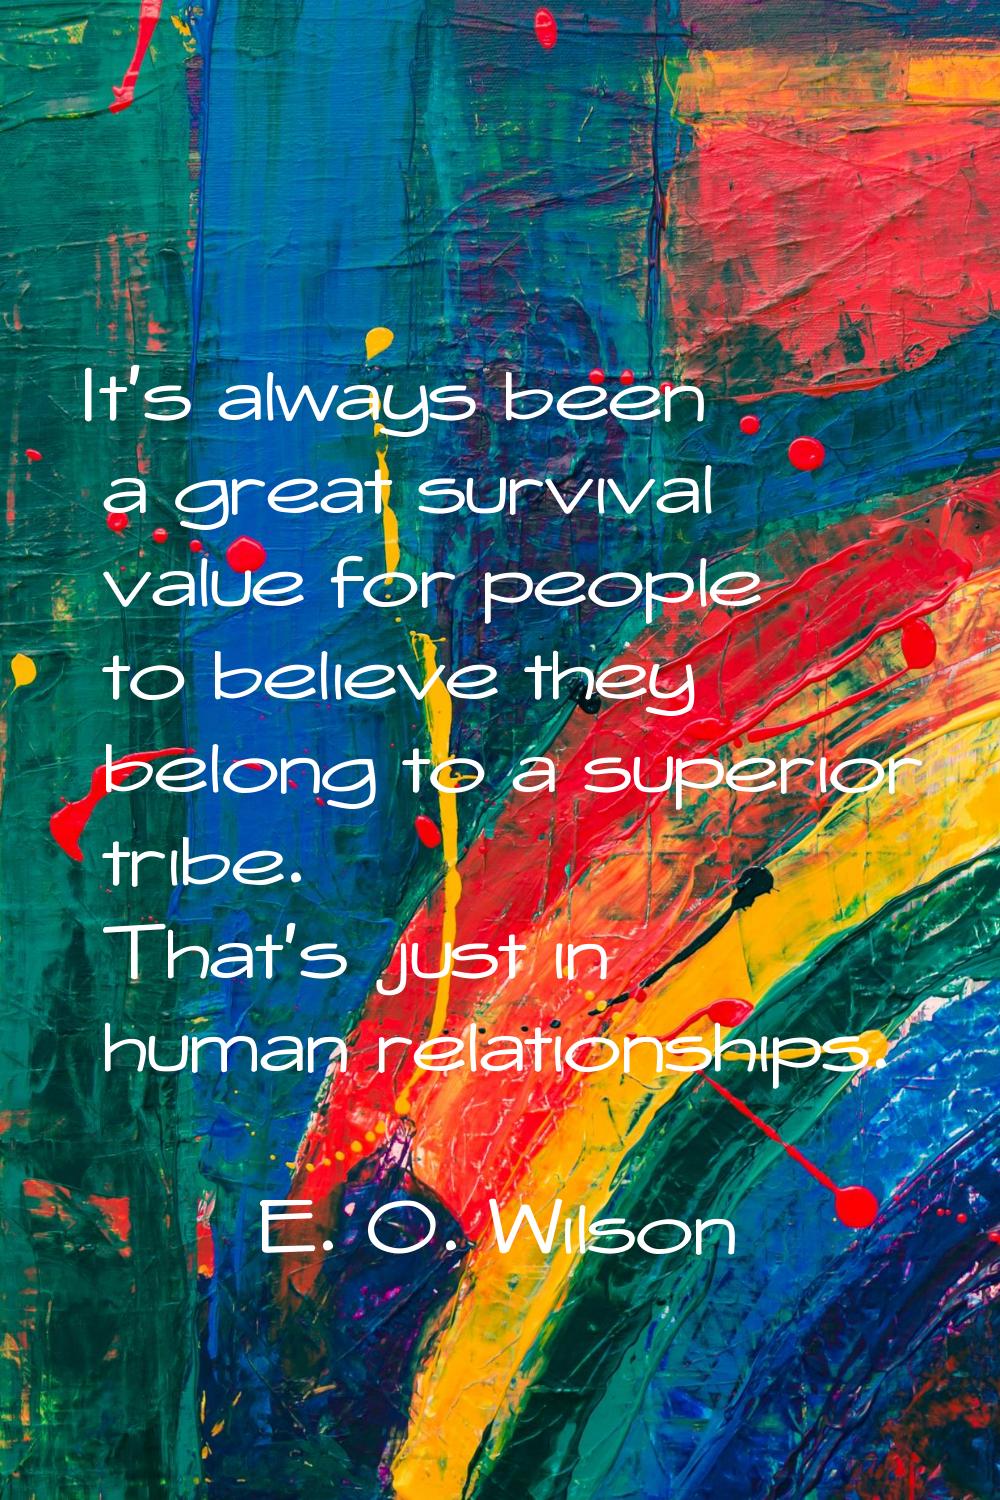 It's always been a great survival value for people to believe they belong to a superior tribe. That